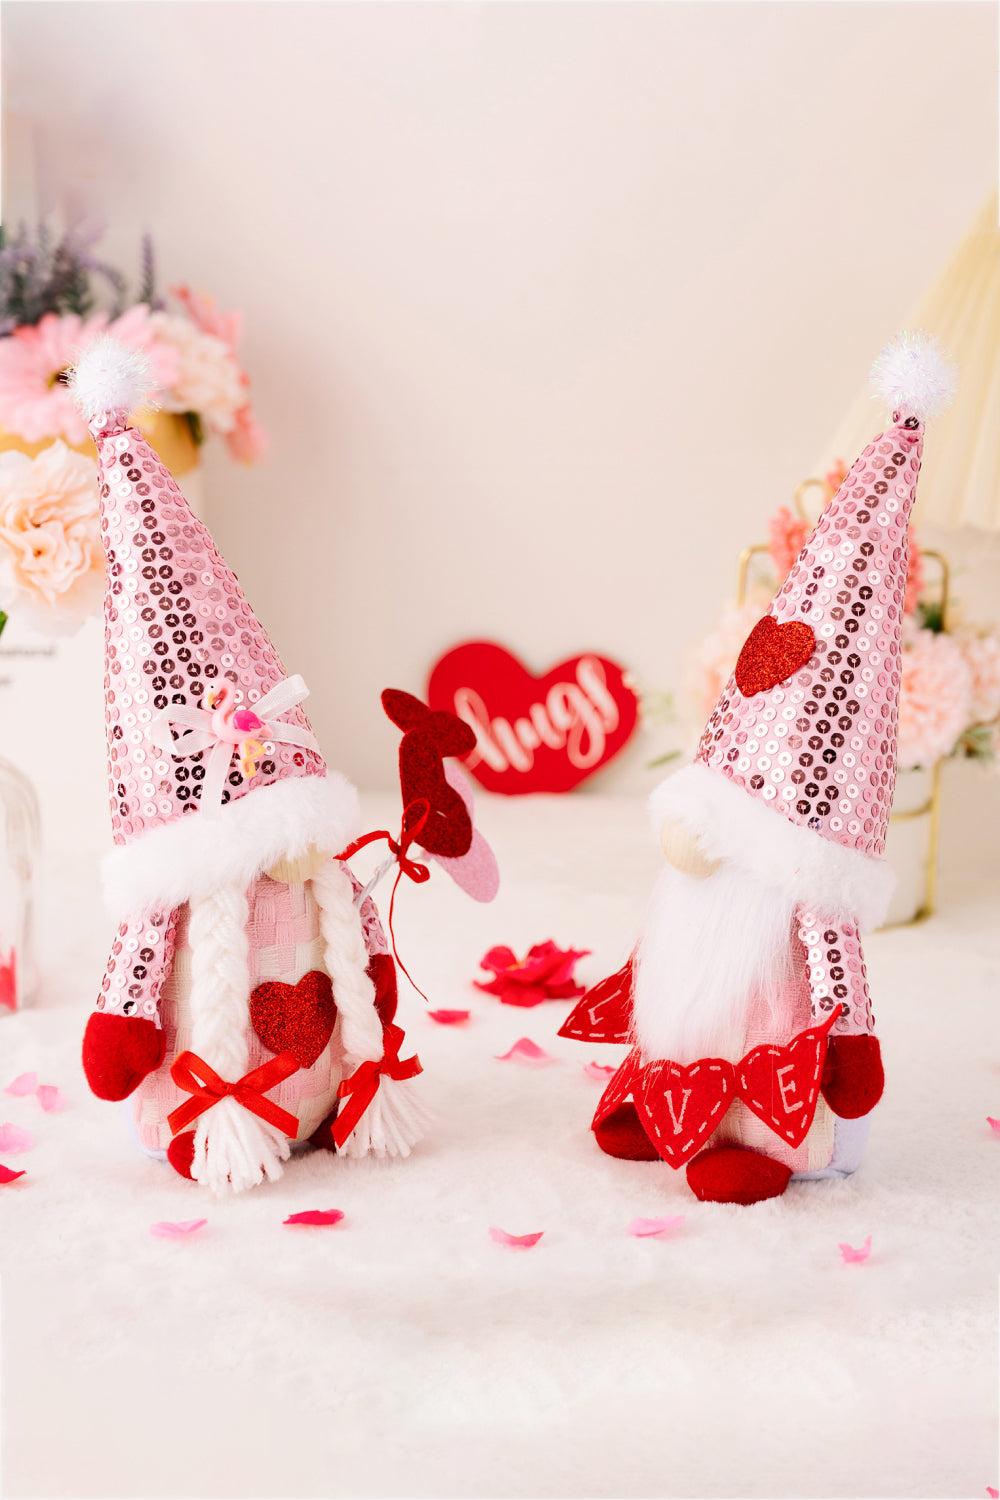 GNOME COLLECTIBLES--Lovely, Sequined Heart Pointed Hat Gnomes (1), choose from two options or buy them both!!  Share them and cheer anyone with these loving, fun and collectibles